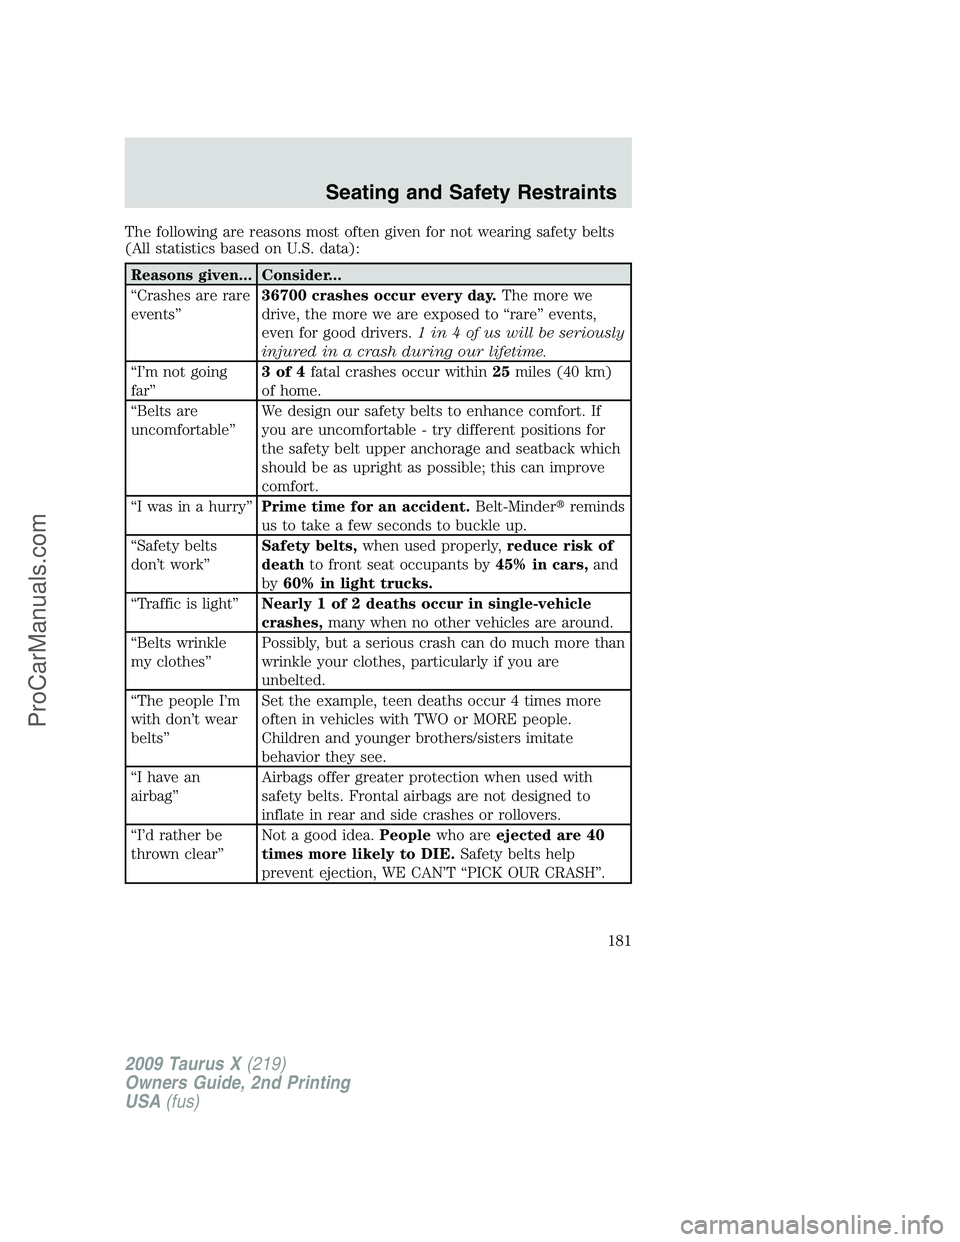 FORD FREESTYLE 2009  Owners Manual The following are reasons most often given for not wearing safety belts
(All statistics based on U.S. data):
Reasons given... Consider...
“Crashes are rare
events”36700 crashes occur every day.The